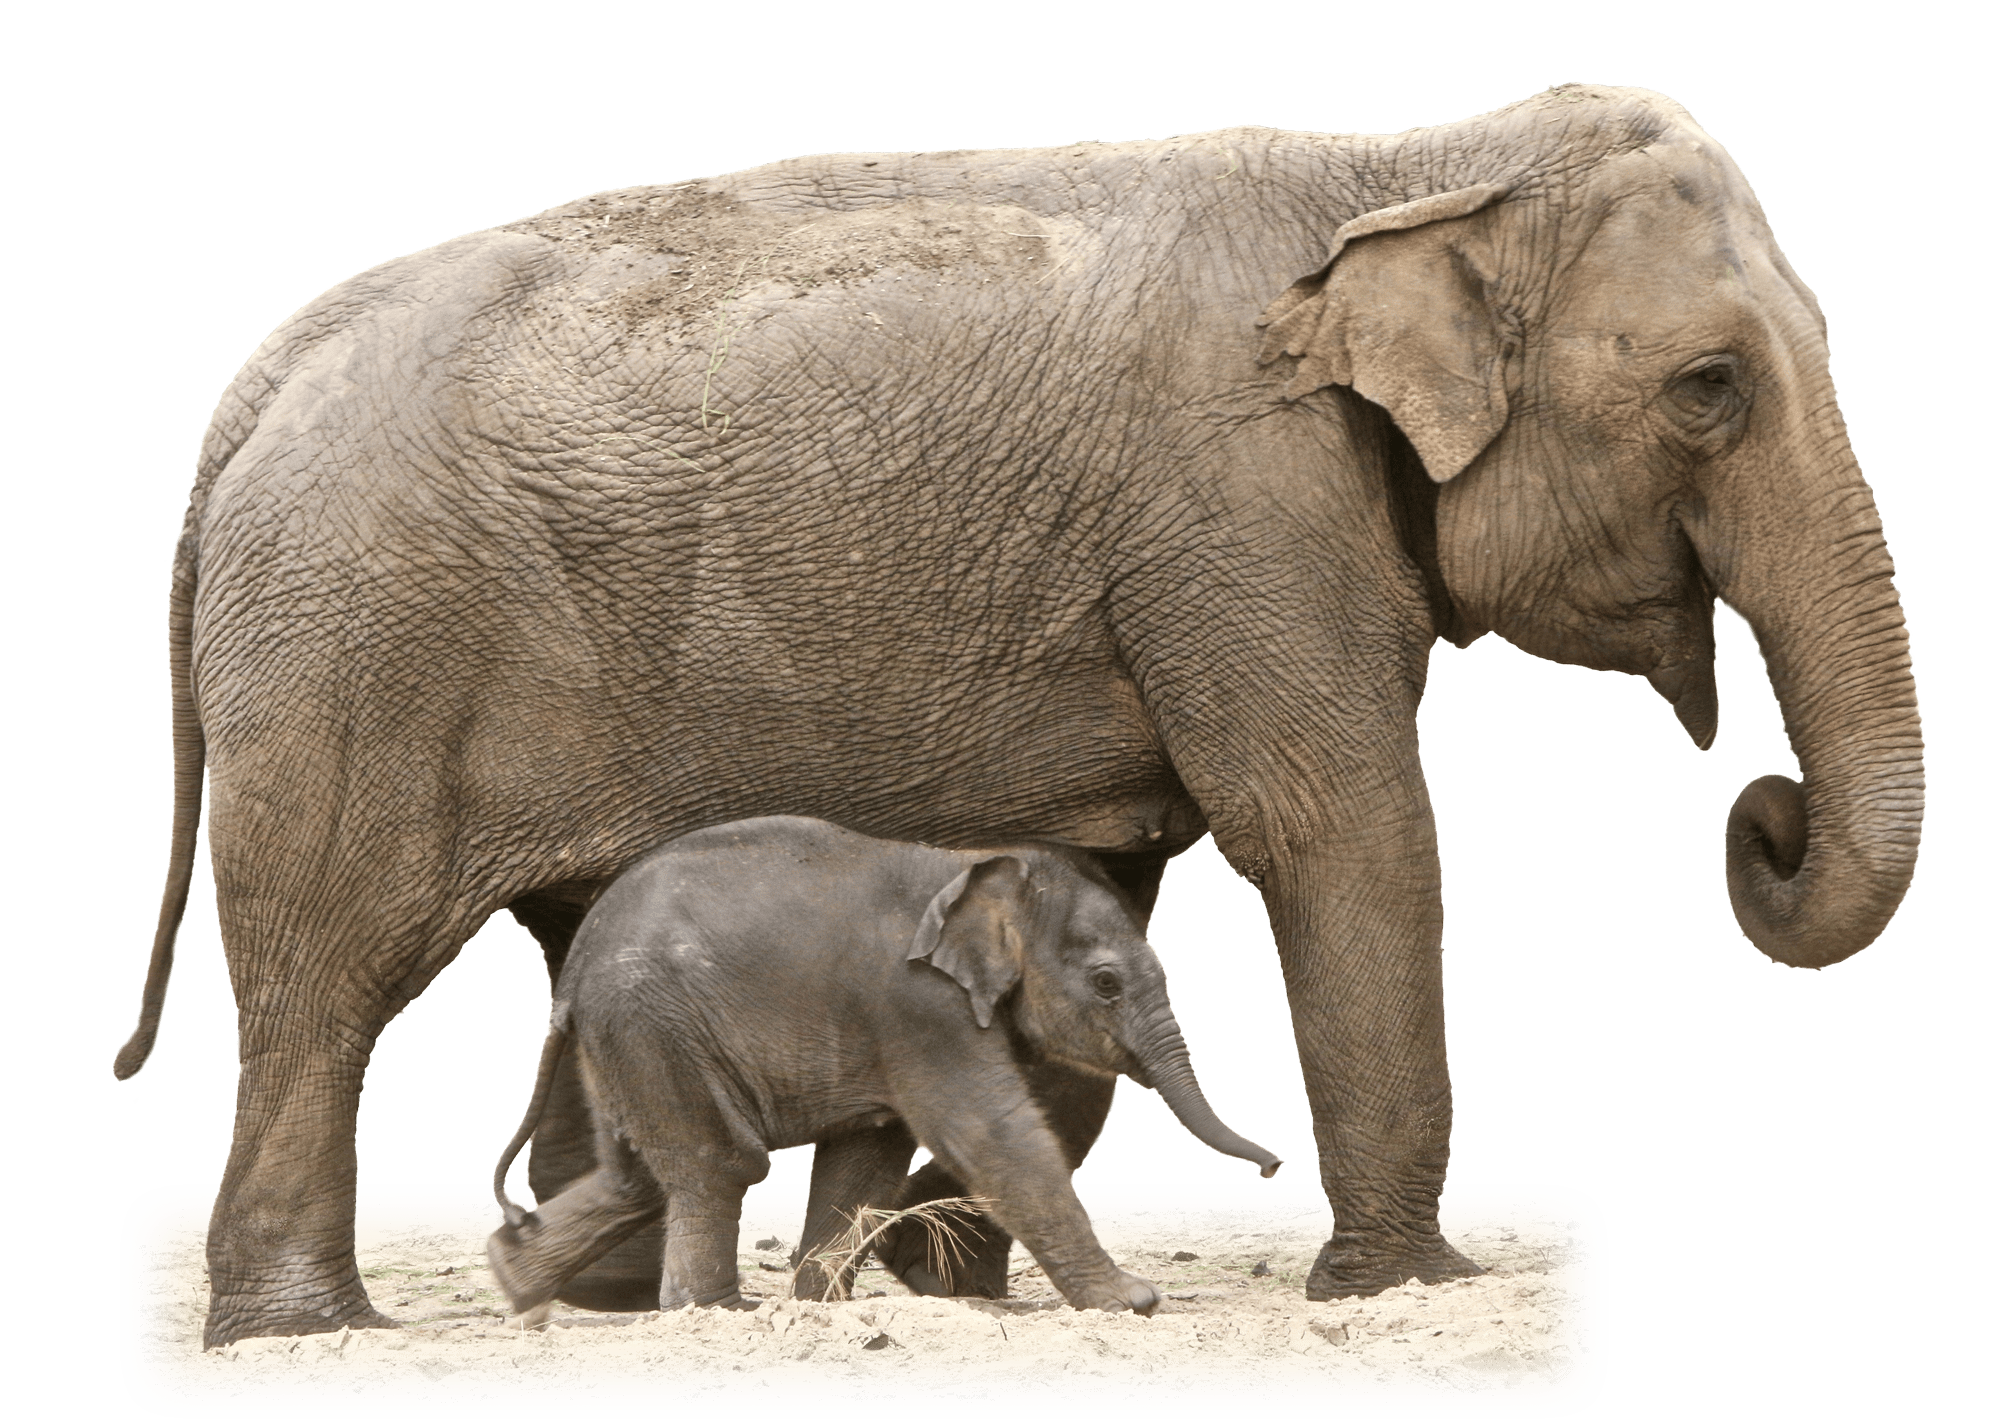 Elephant Png Images - That you can download to your computer and use in ...